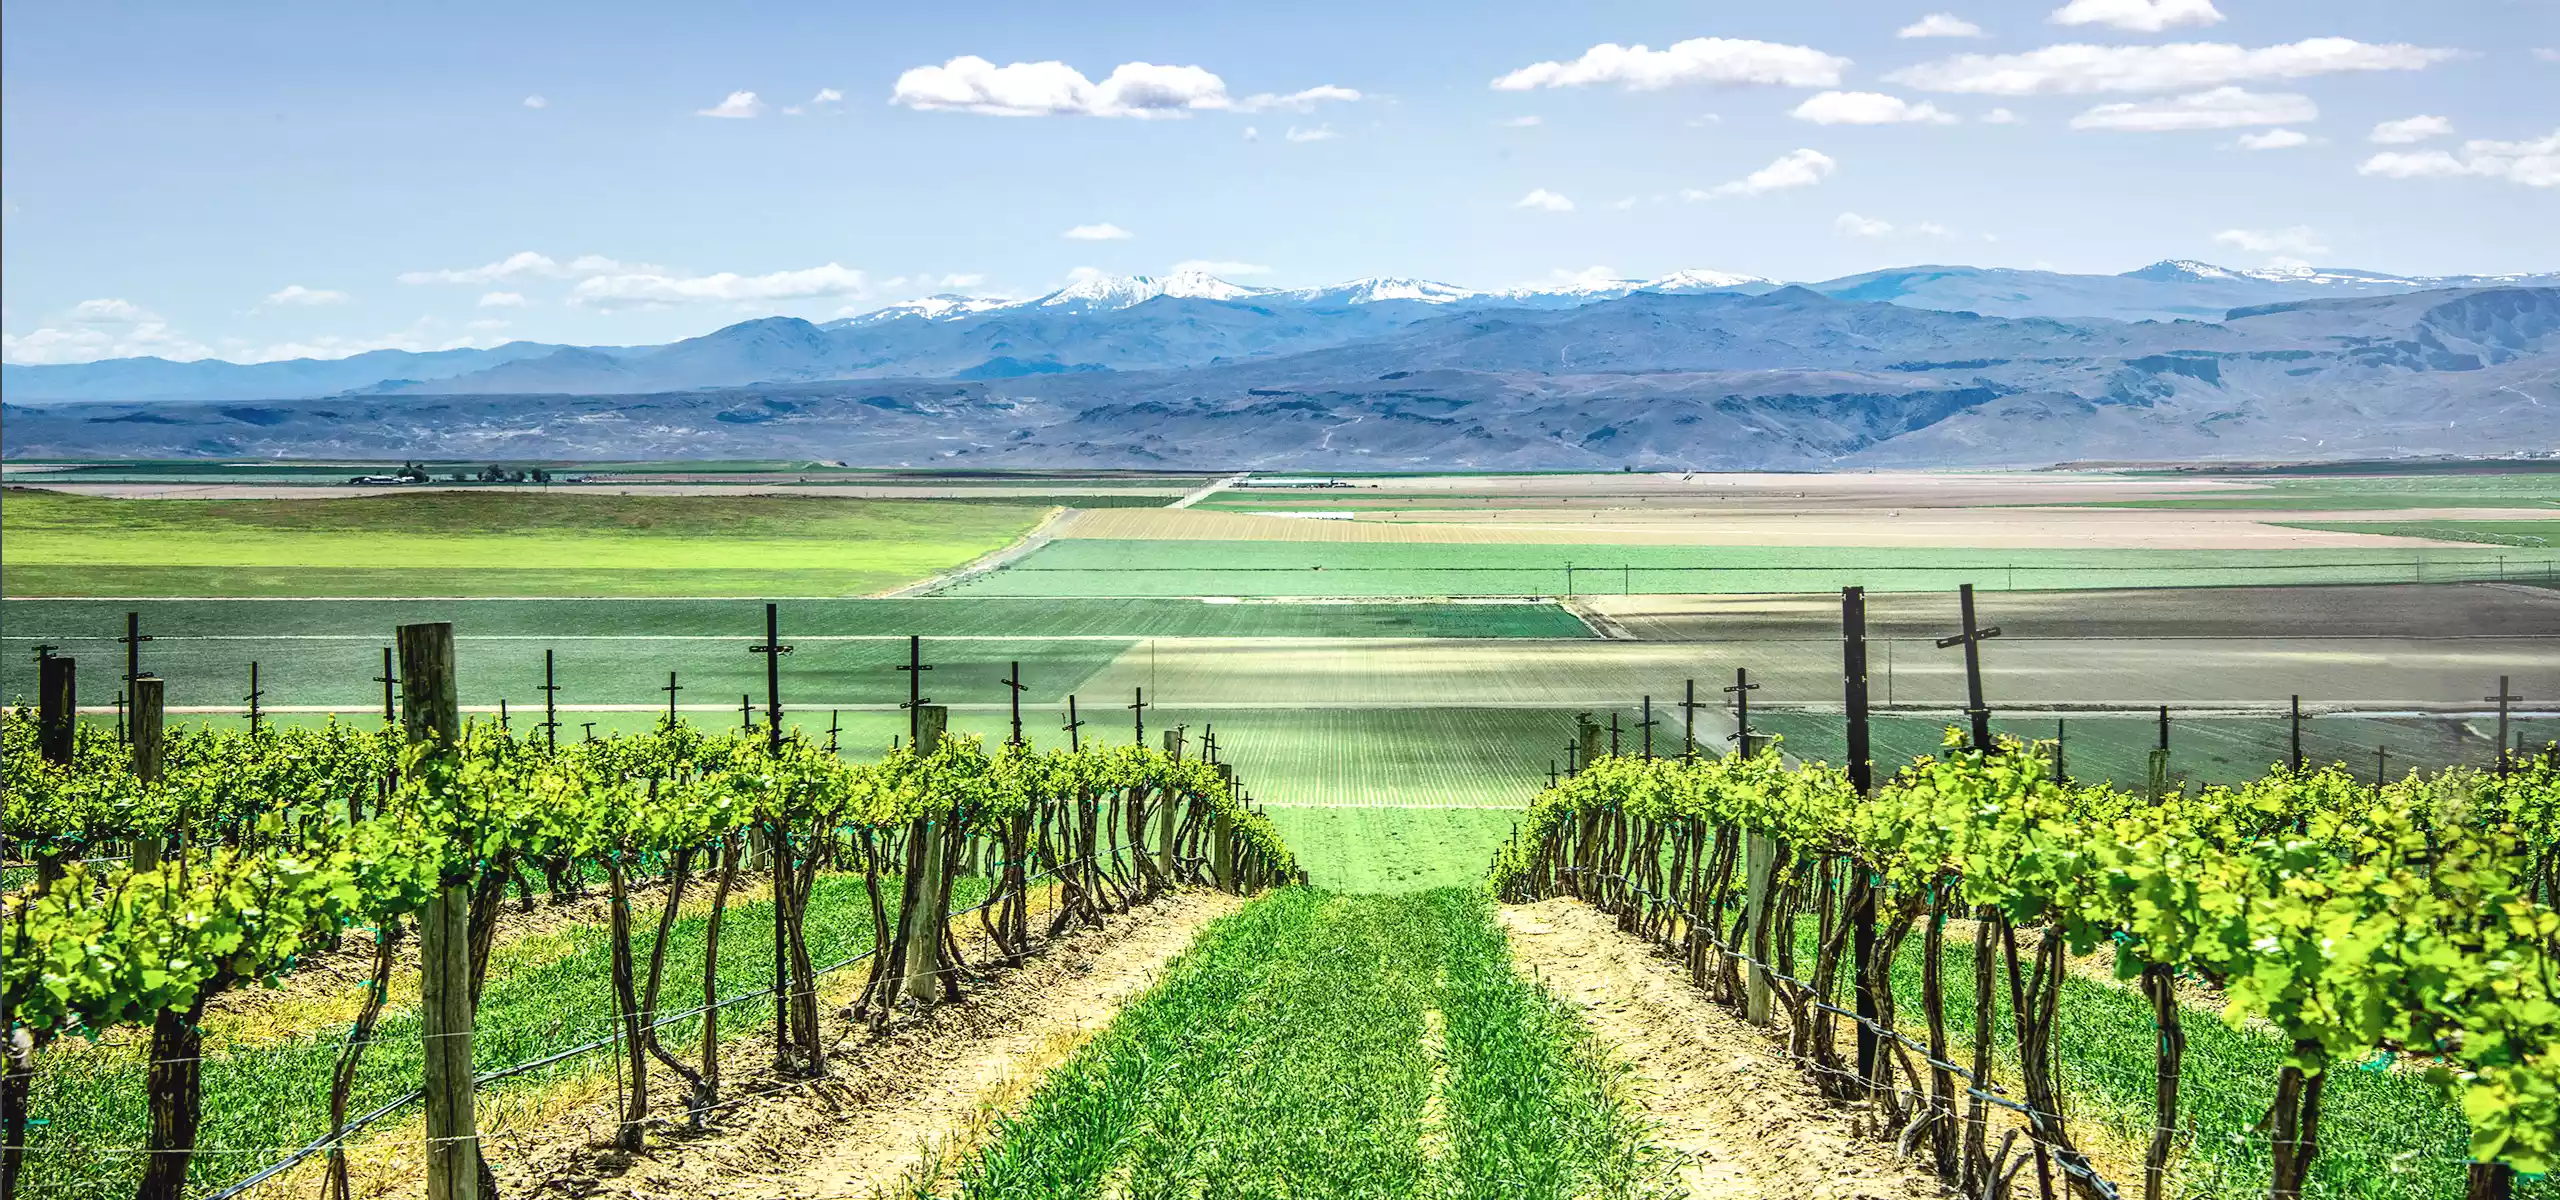 Rows of grapevines with fields and mountains in the background